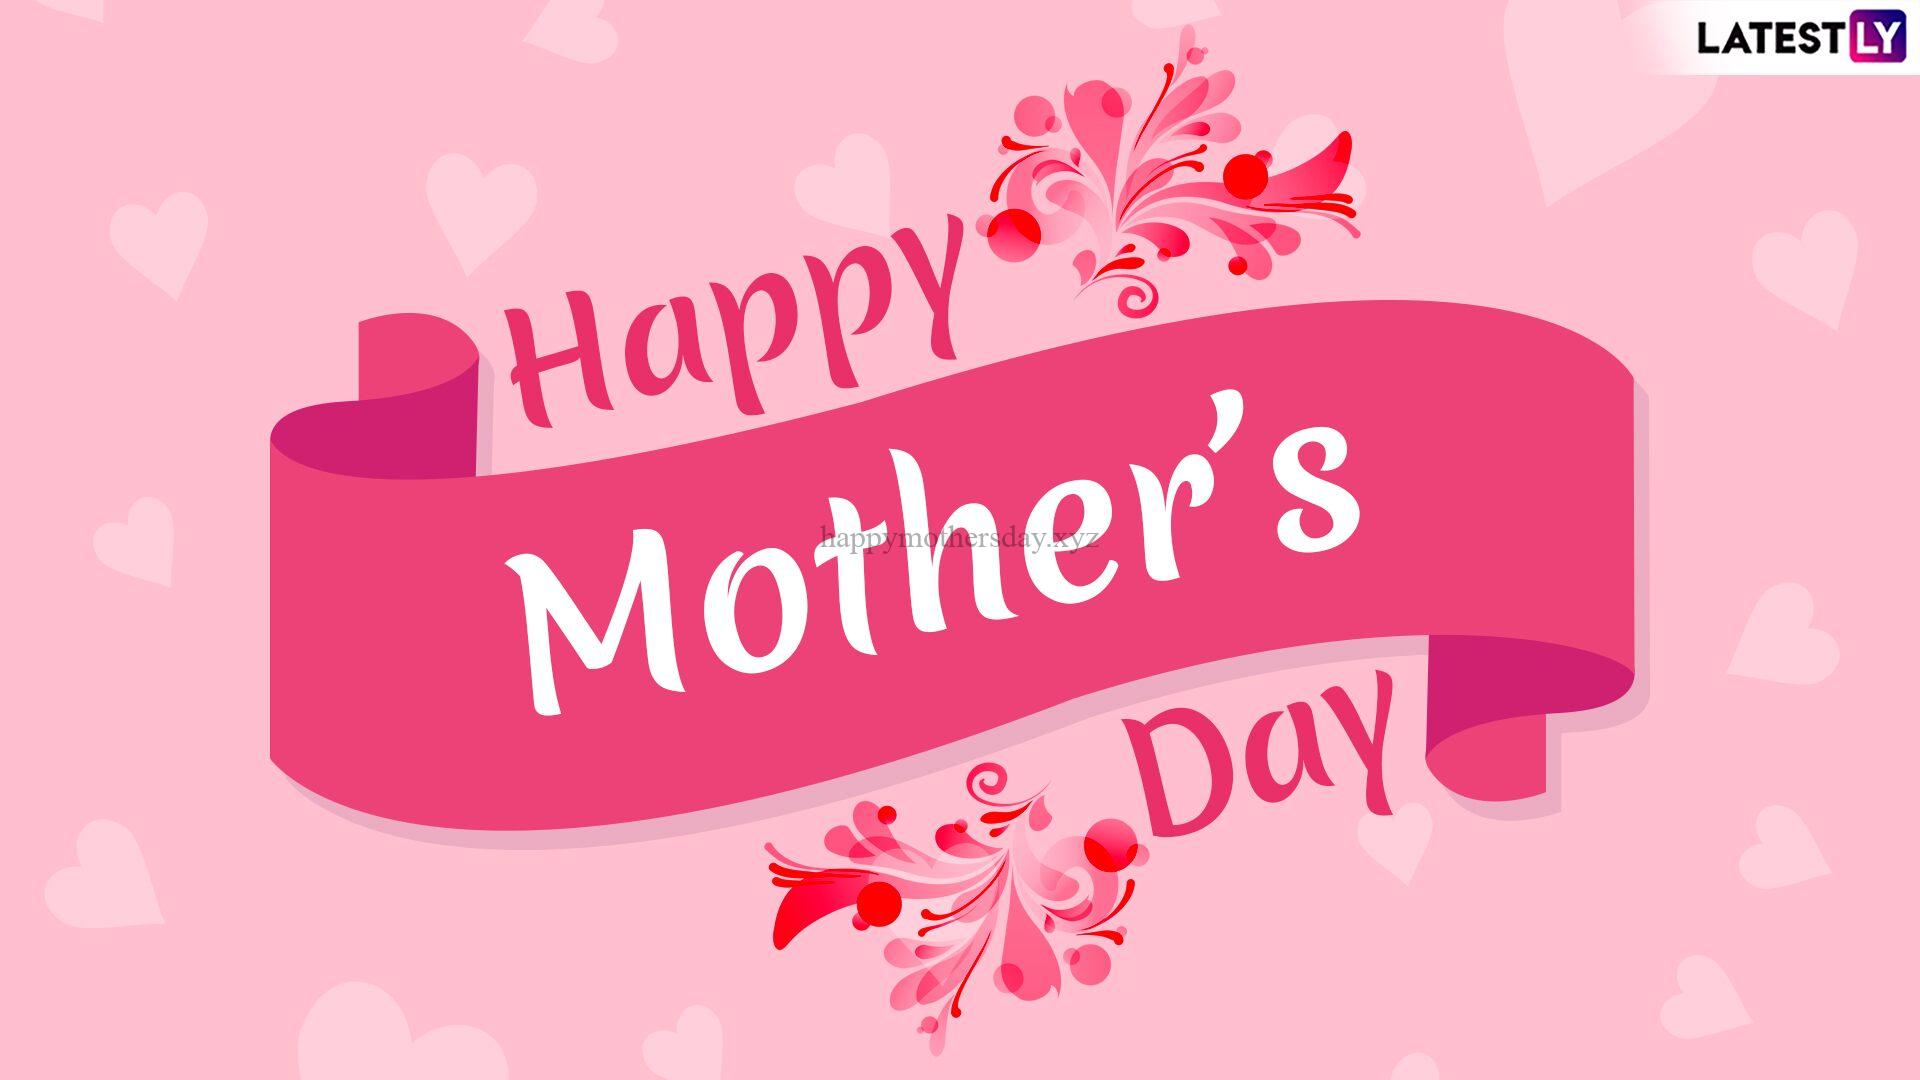 Happy Mothers Day Wishes Message Quotes Sayings Image